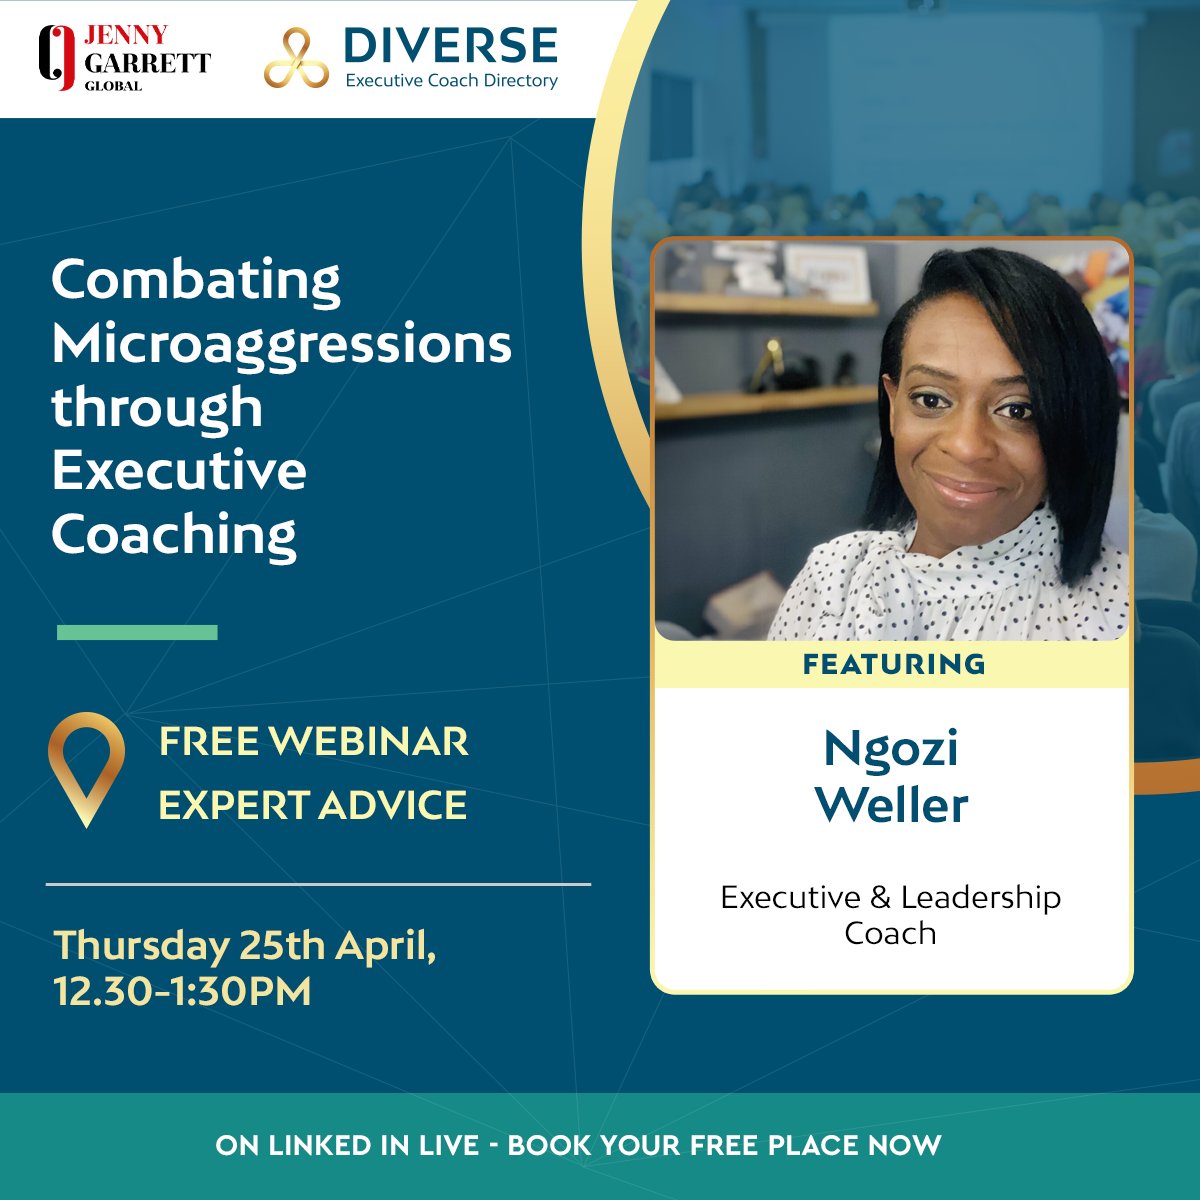 Attend our free webinar on microaggressions in the workplace and learn how to cultivate a more respectful, inclusive culture. Featuring expert speaker @marthacuffy. Hurry and register bit.ly/4cy2DCM #RespectfulWorkplace #InclusiveLeadership